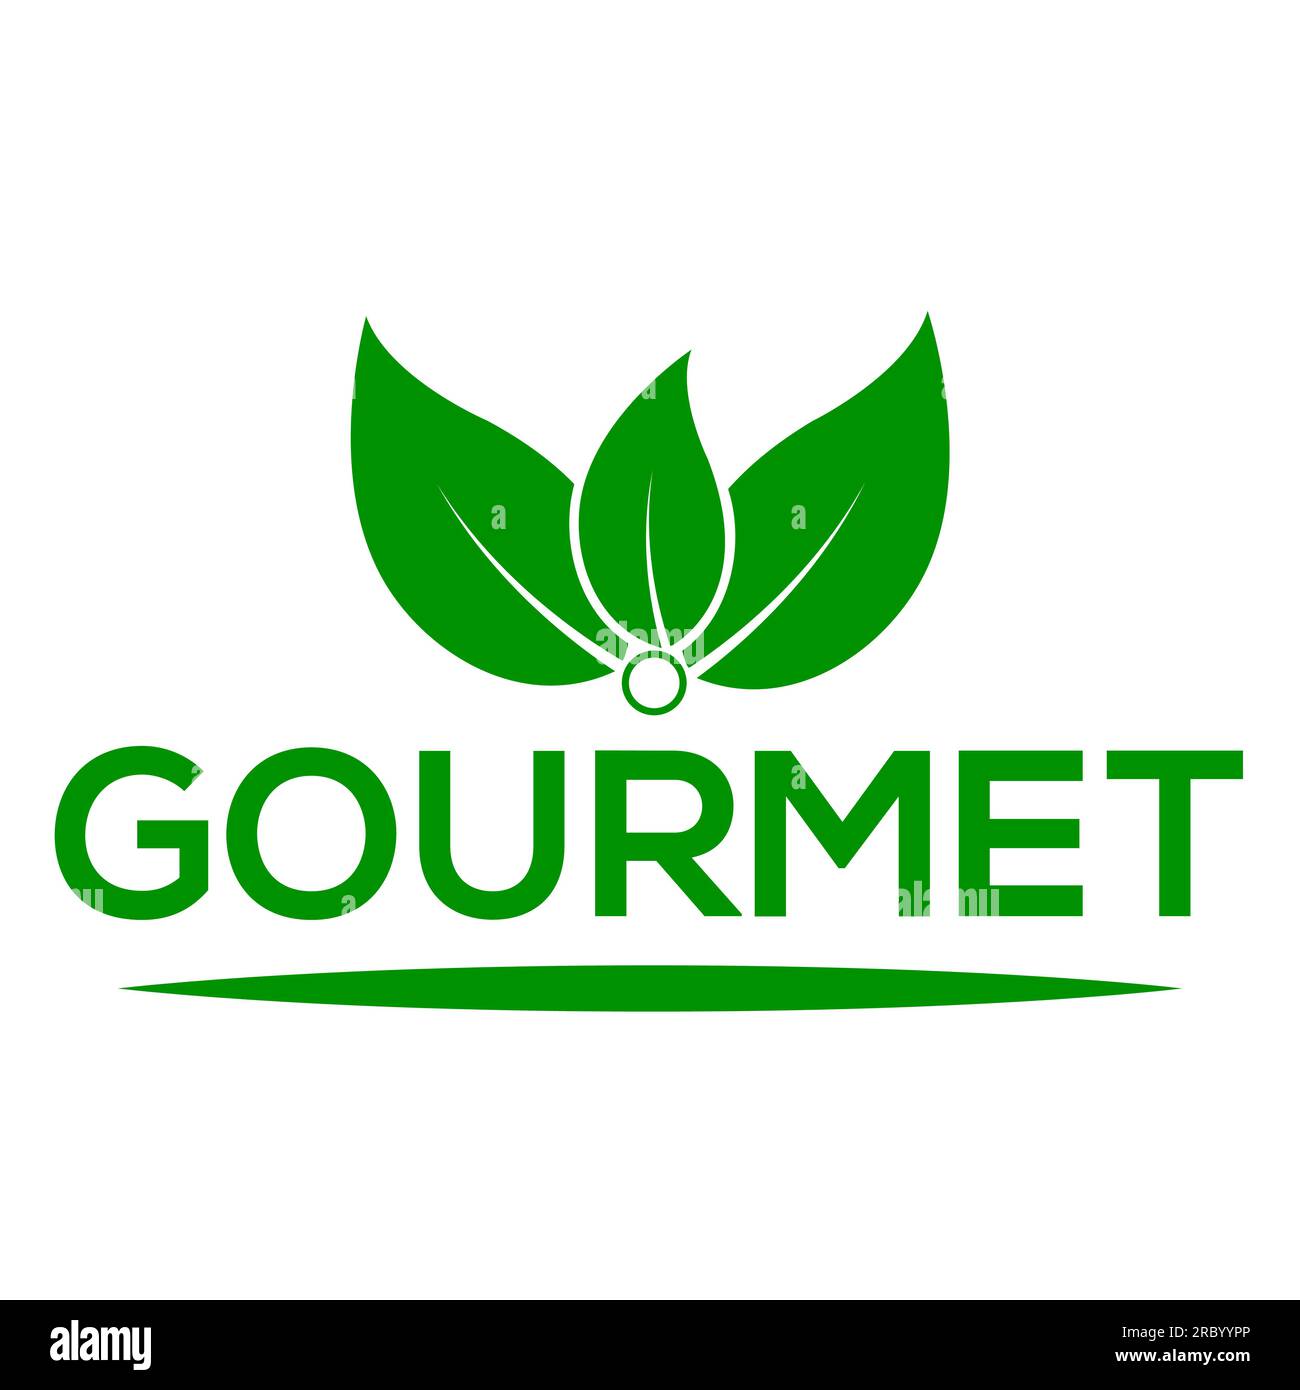 Gourmet leaf vector logo white background Gourmet leaf logo or icon Stock Vector